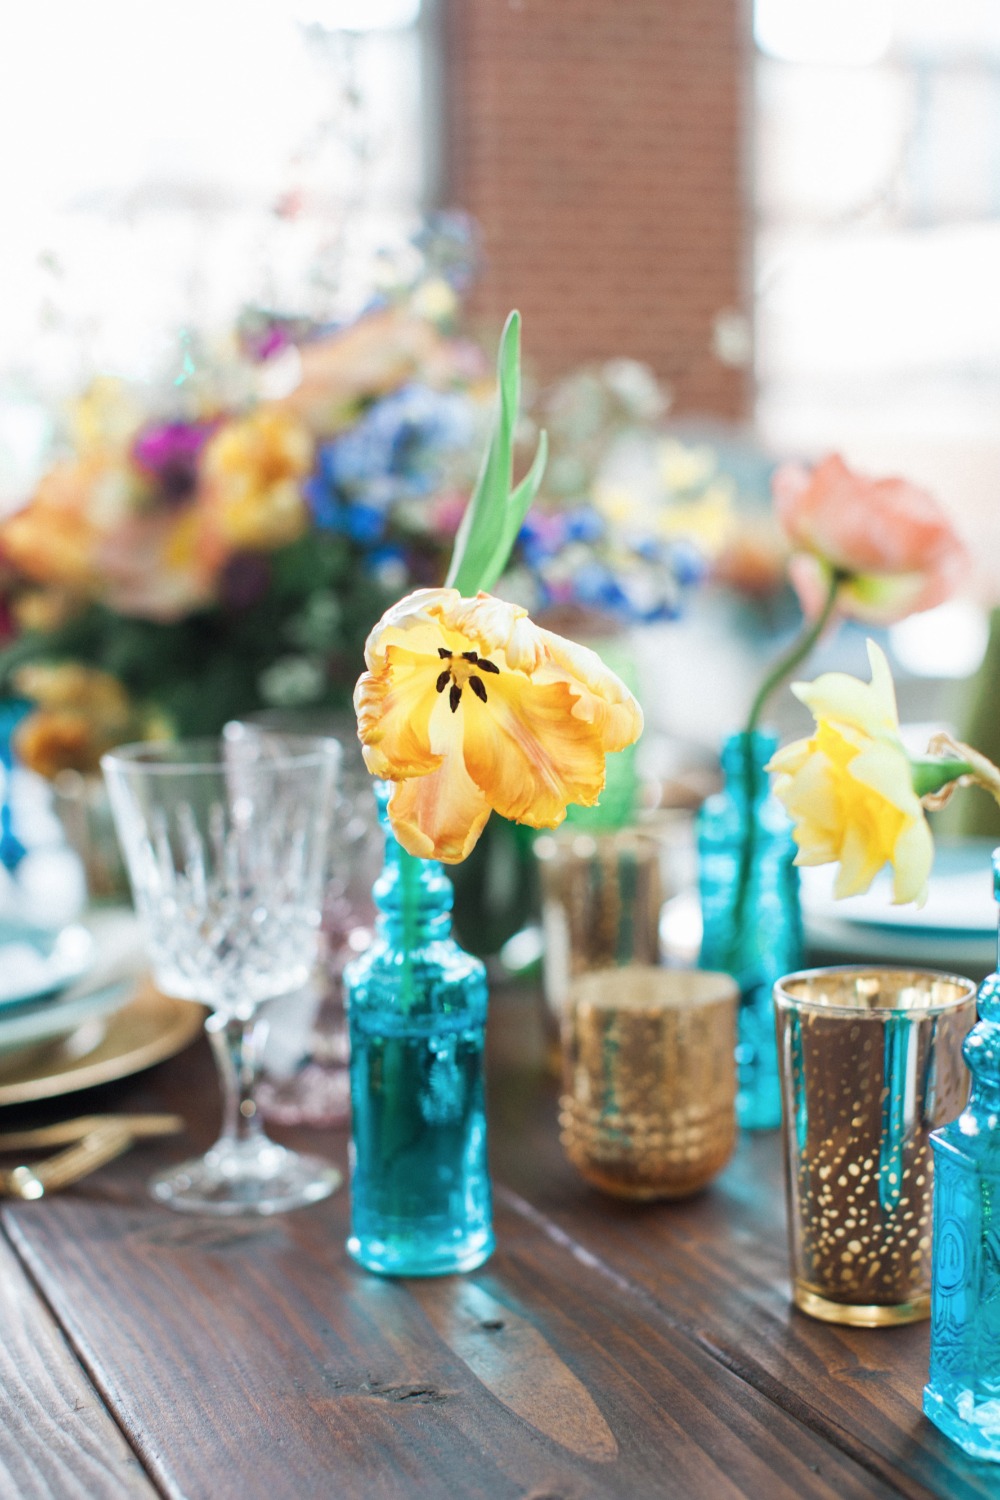 Simple and chic table decor